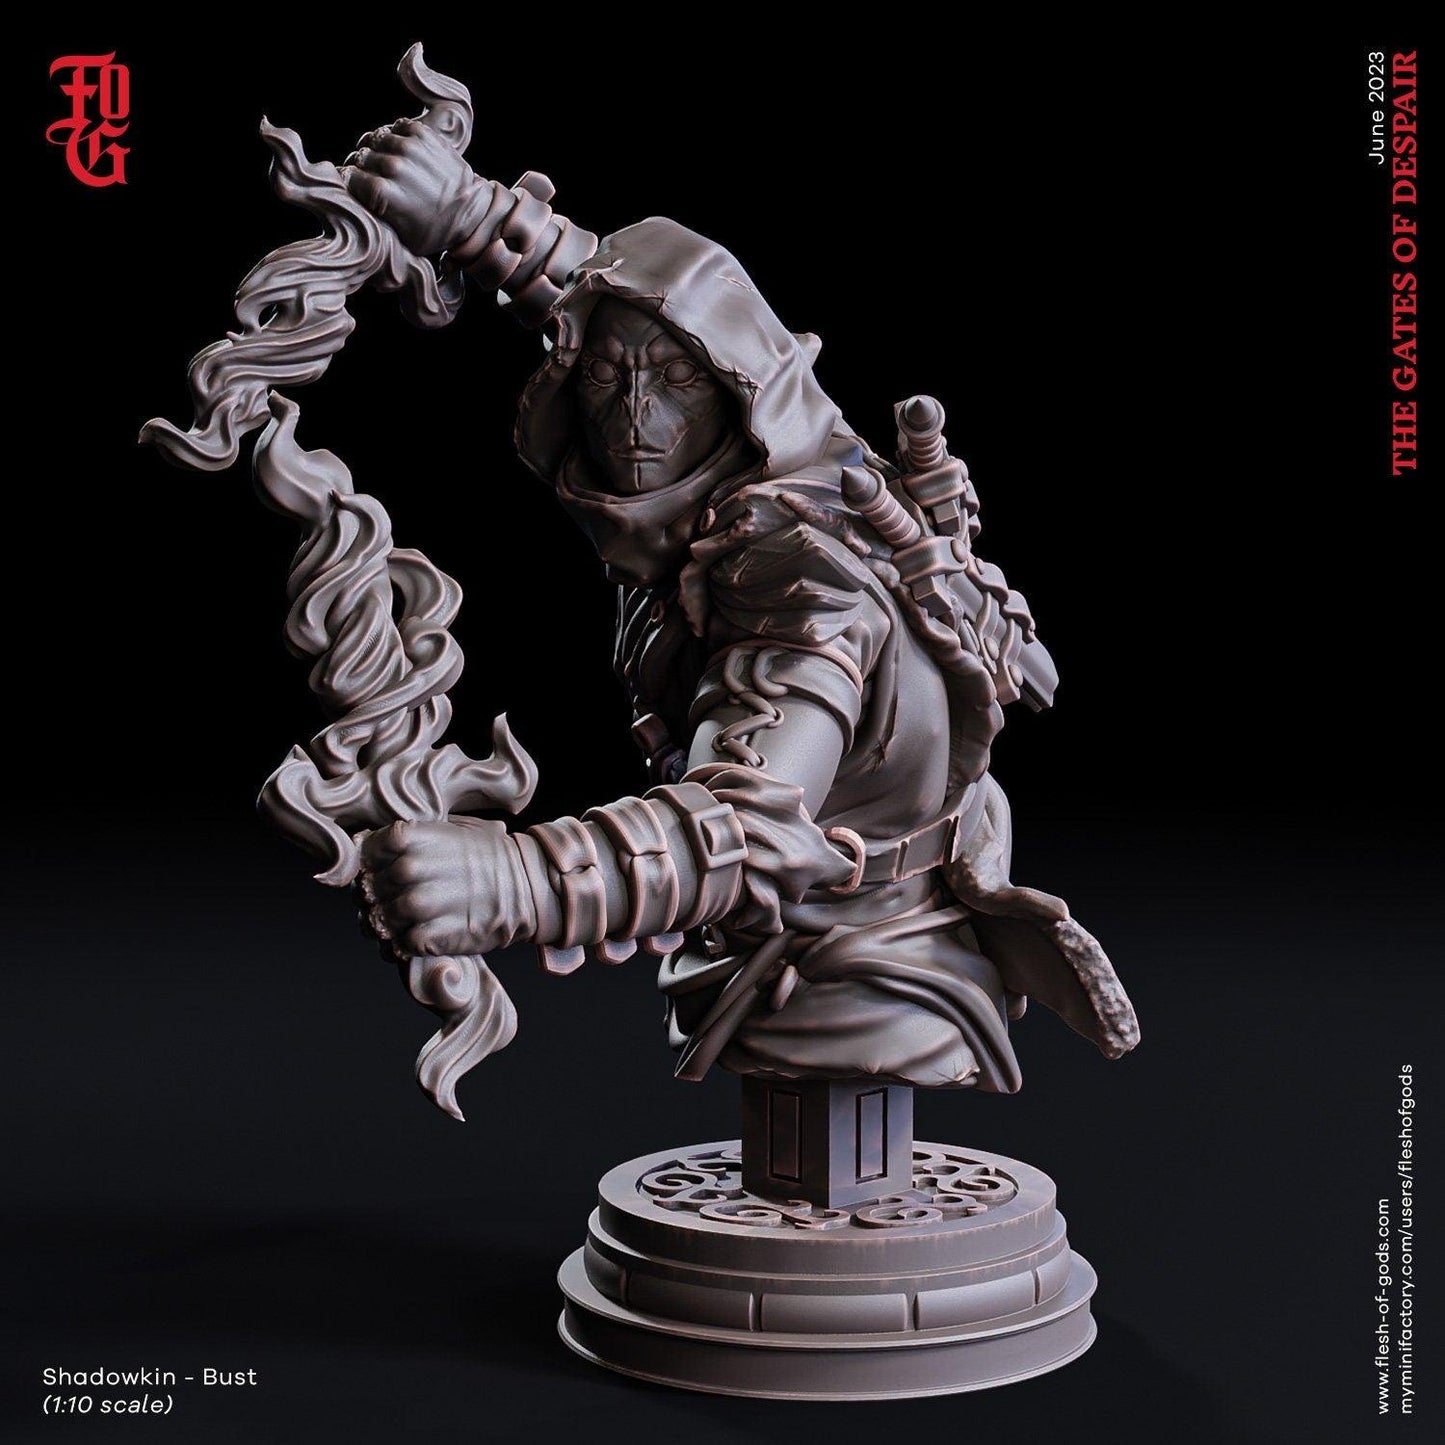 DnD Female Shadowkin Miniature | Rogue for Tabletop Gaming | 32mm Scale - Plague Miniatures shop for DnD Miniatures